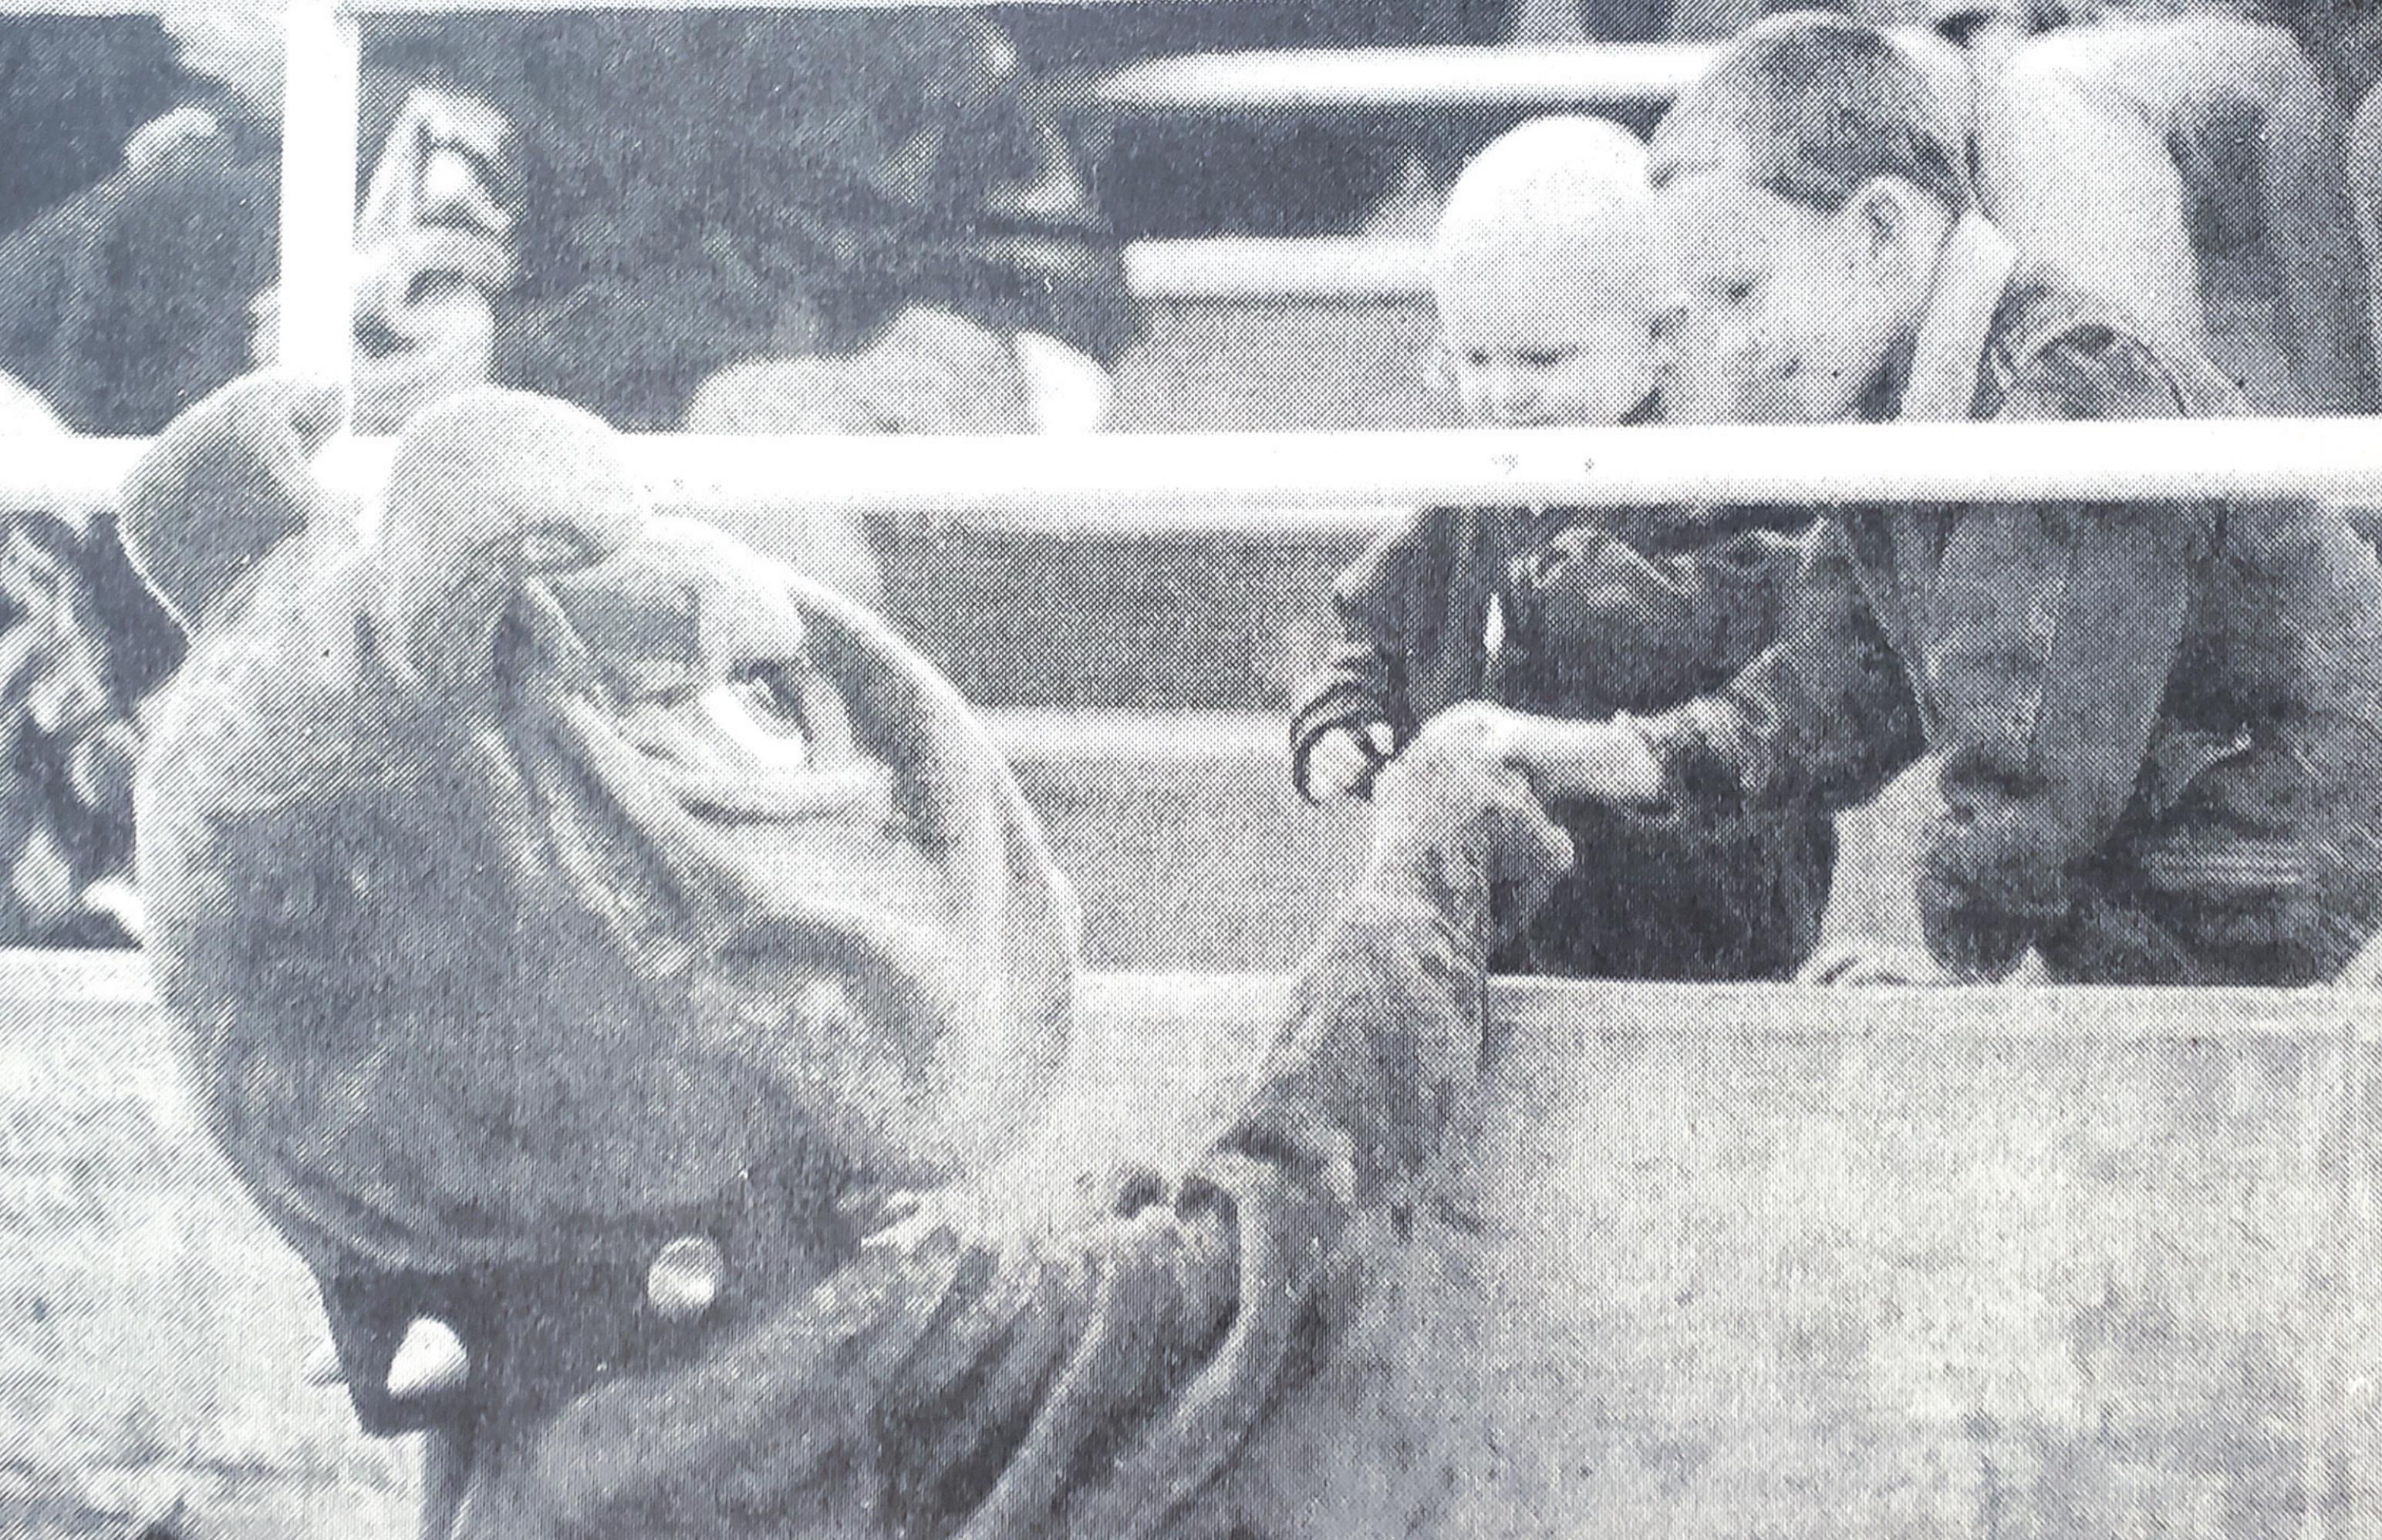 Elijah and Joshua Ratliff meet Brandy the Bulldog at a Southwestern Oklahoma State University football game earlier this month. Brandy was at the Southwestern Fan Jam that night at the Rankin Williams gymnasium. This picture was featured in the November 14, 2000, edition of the Weatherford Daily News.